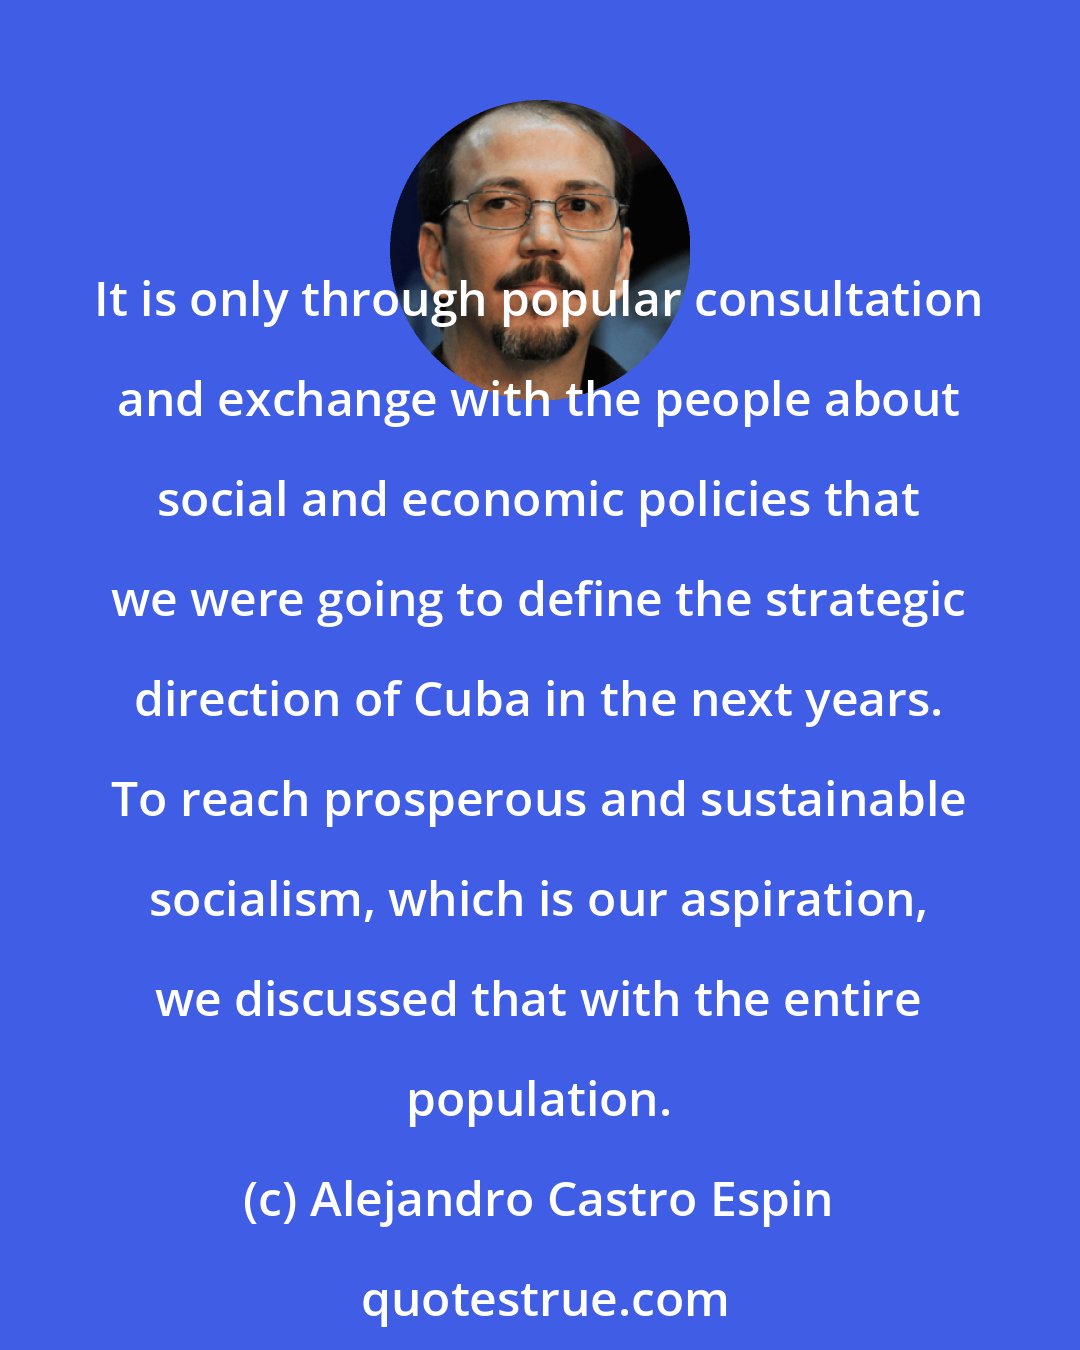 Alejandro Castro Espin: It is only through popular consultation and exchange with the people about social and economic policies that we were going to define the strategic direction of Cuba in the next years. To reach prosperous and sustainable socialism, which is our aspiration, we discussed that with the entire population.